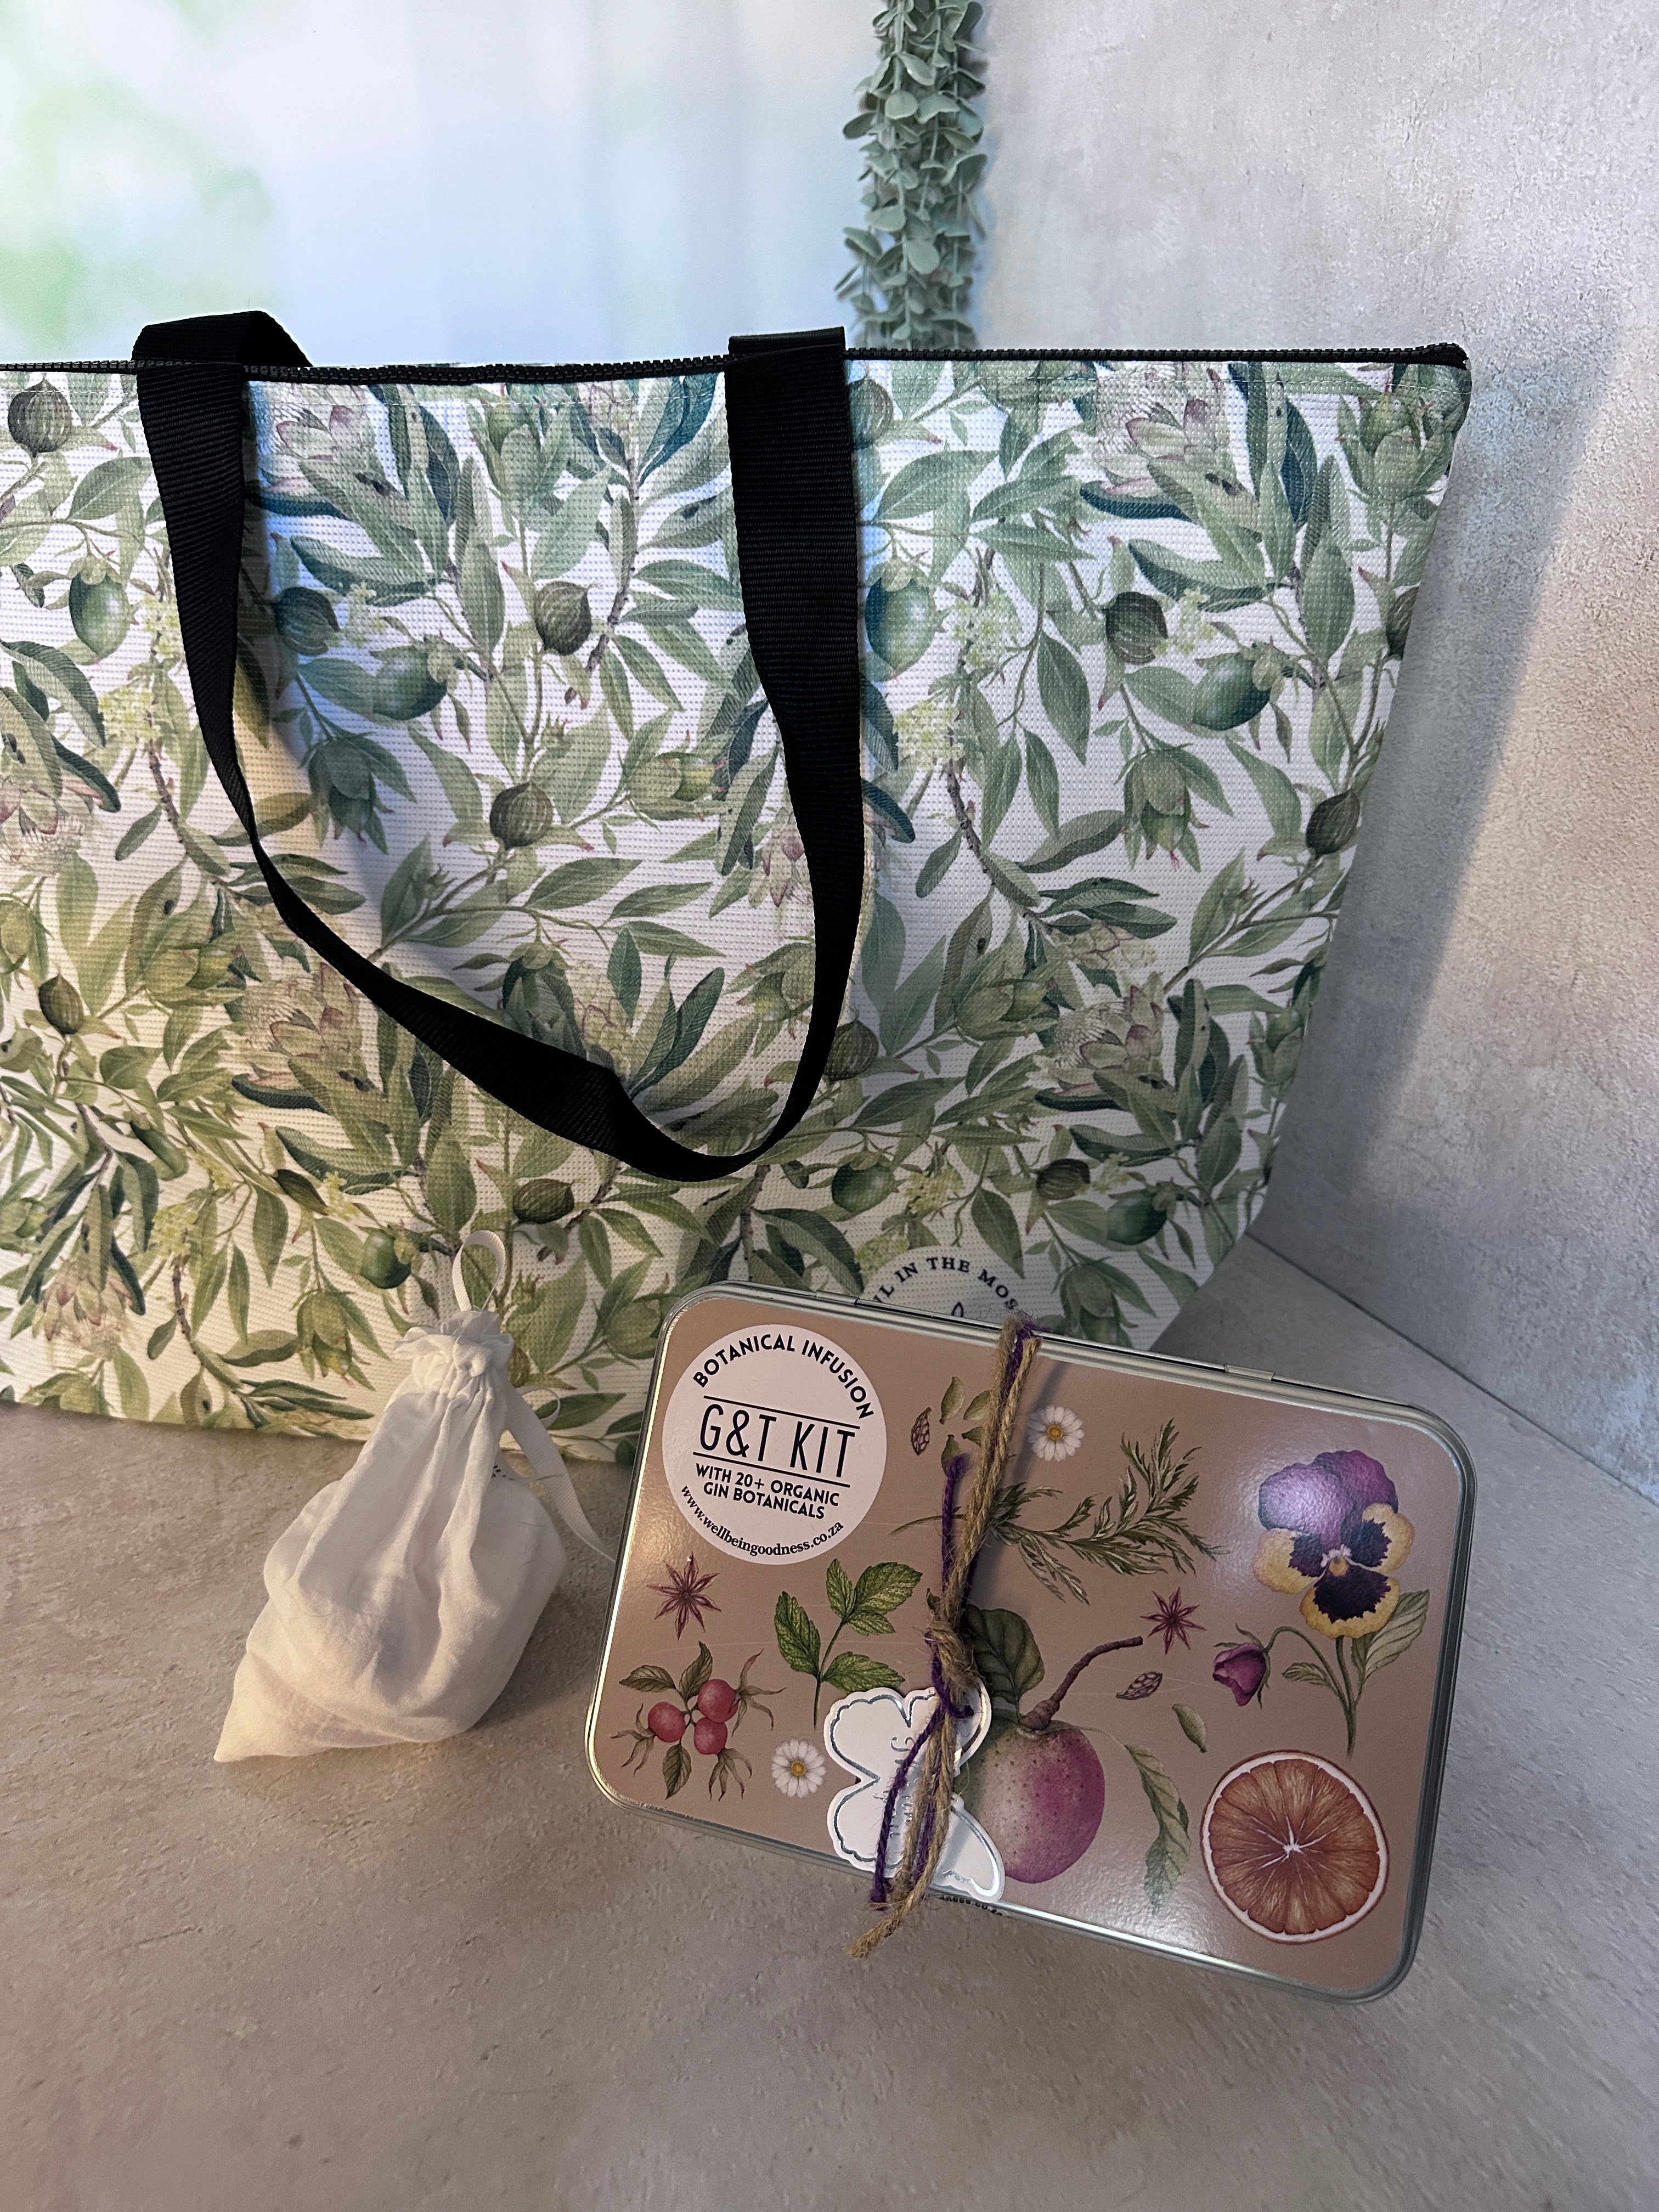 bee festive gift sets gift ideas mothers day south africa g&t kit gin bath bombs tote bag south africa